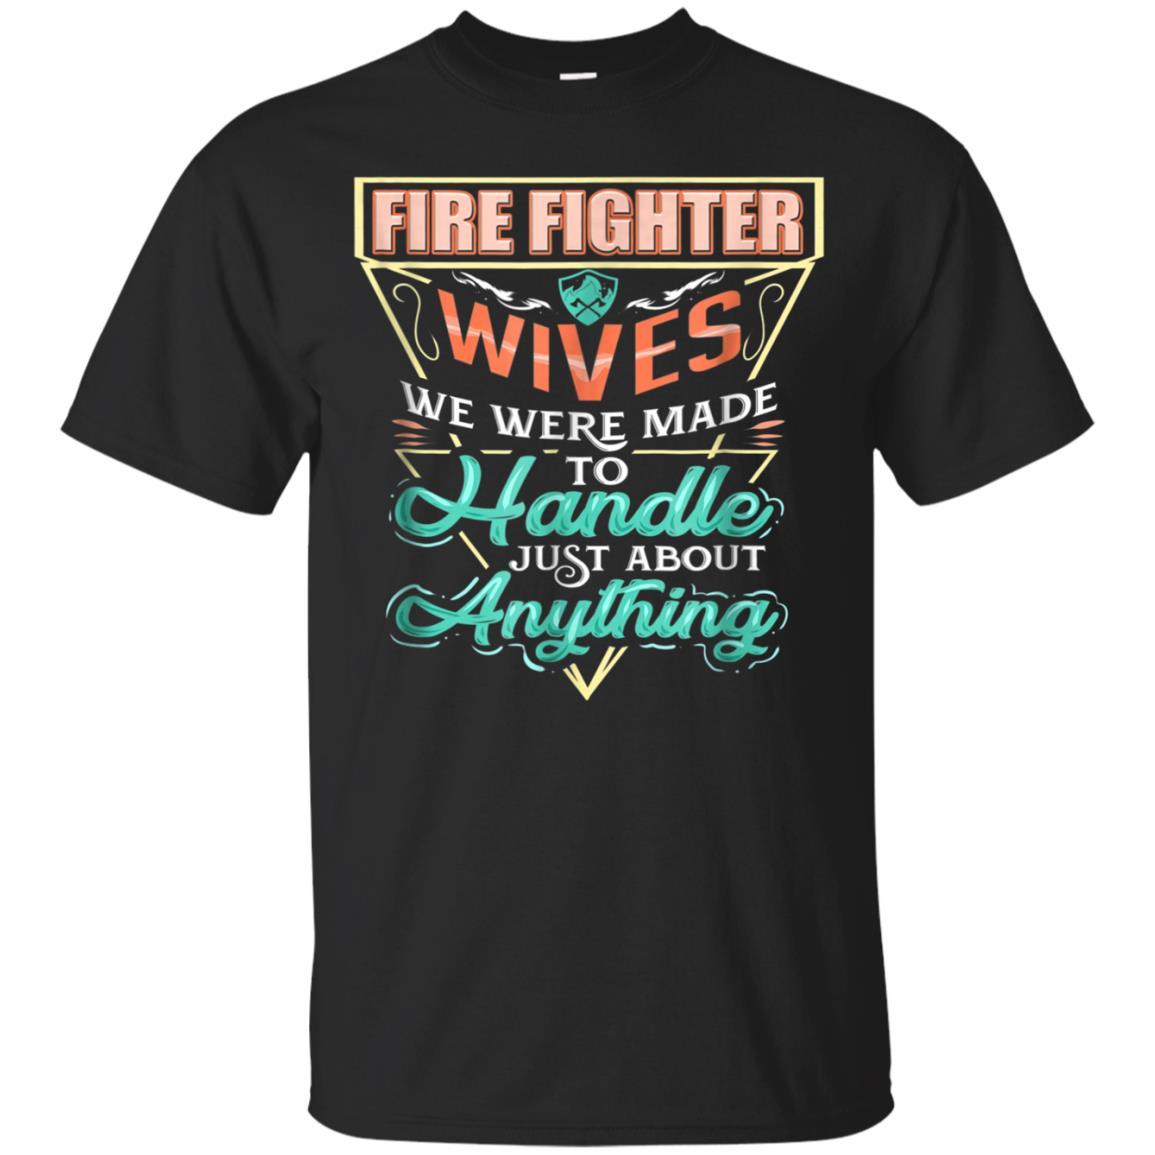 Cute Firefighter Wife Shirt Funny Gift Idea Mom Mothers Day Catsolo Fashion T-shirt